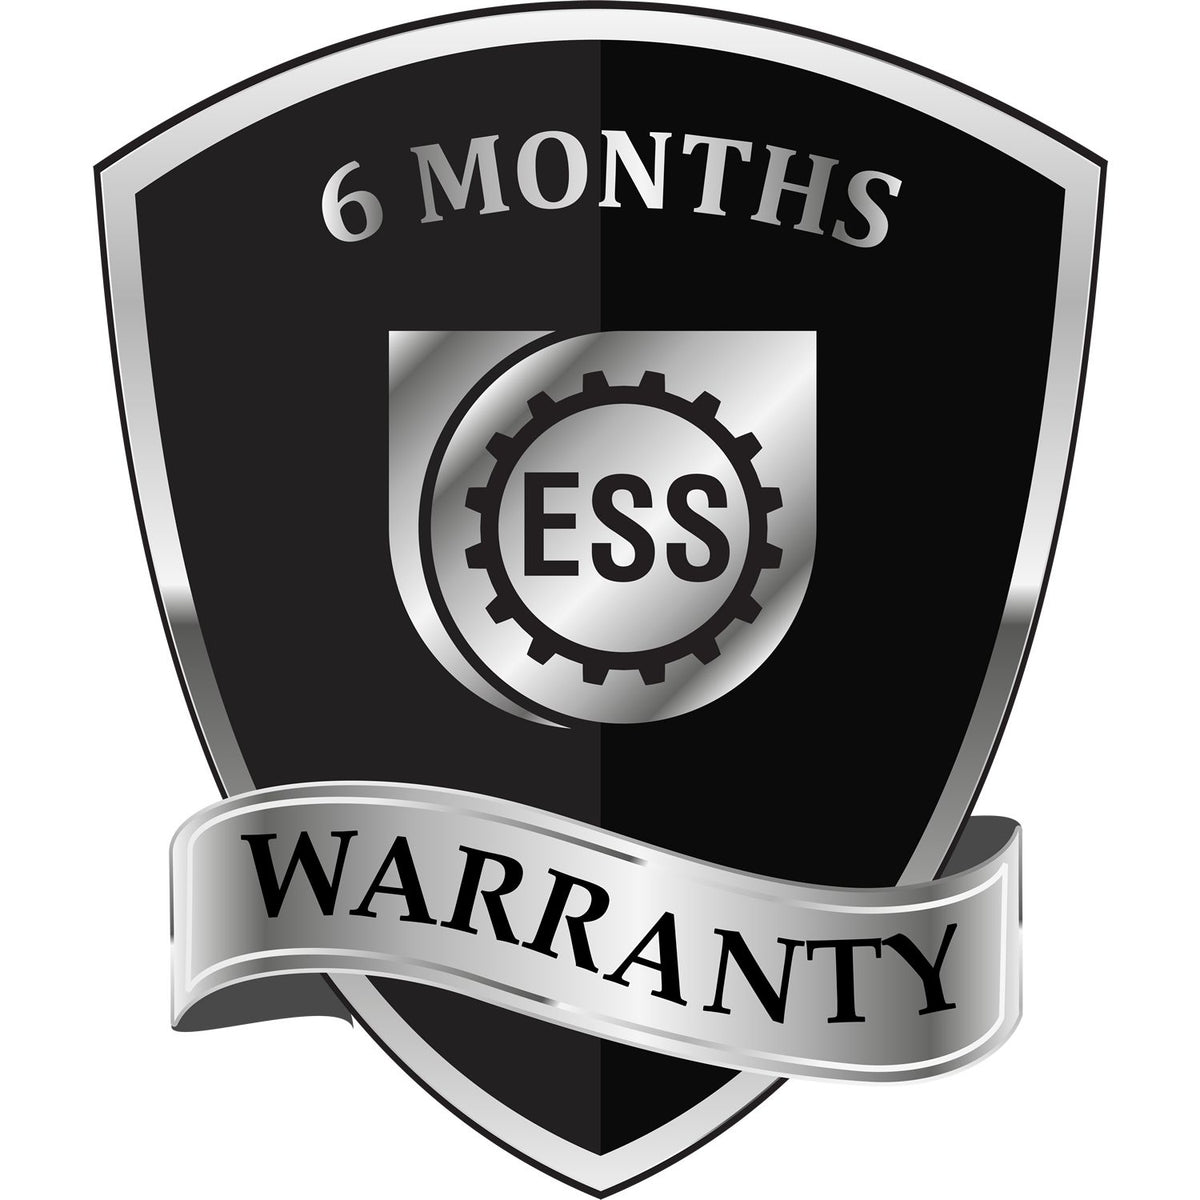 A badge or emblem showing a warranty icon for the Self-Inking Vermont PE Stamp